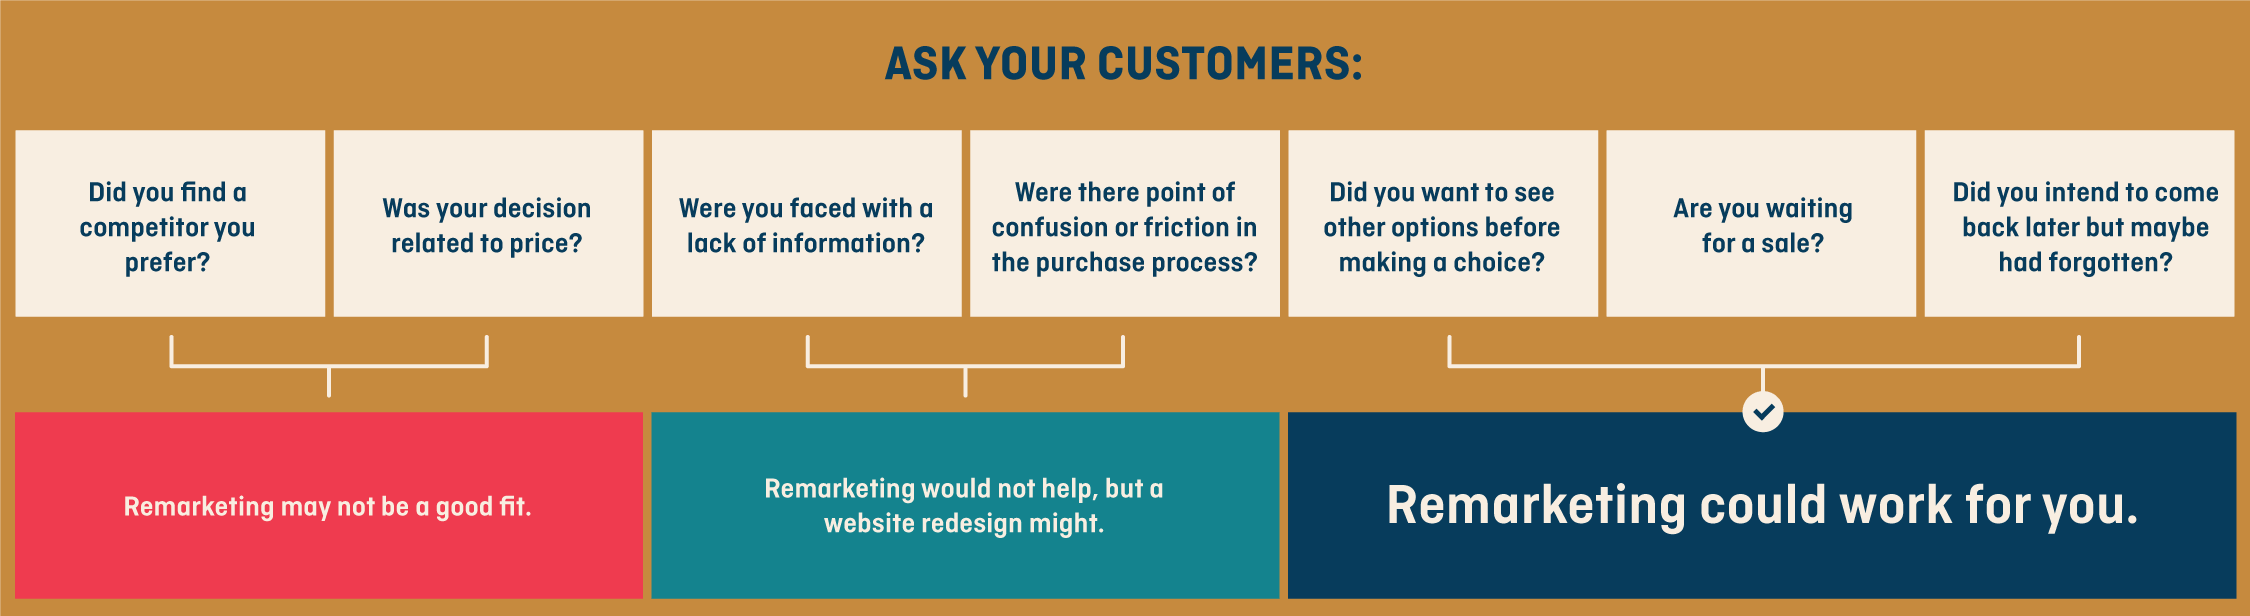 Ask your customers questions to determine if remarketing is right for you